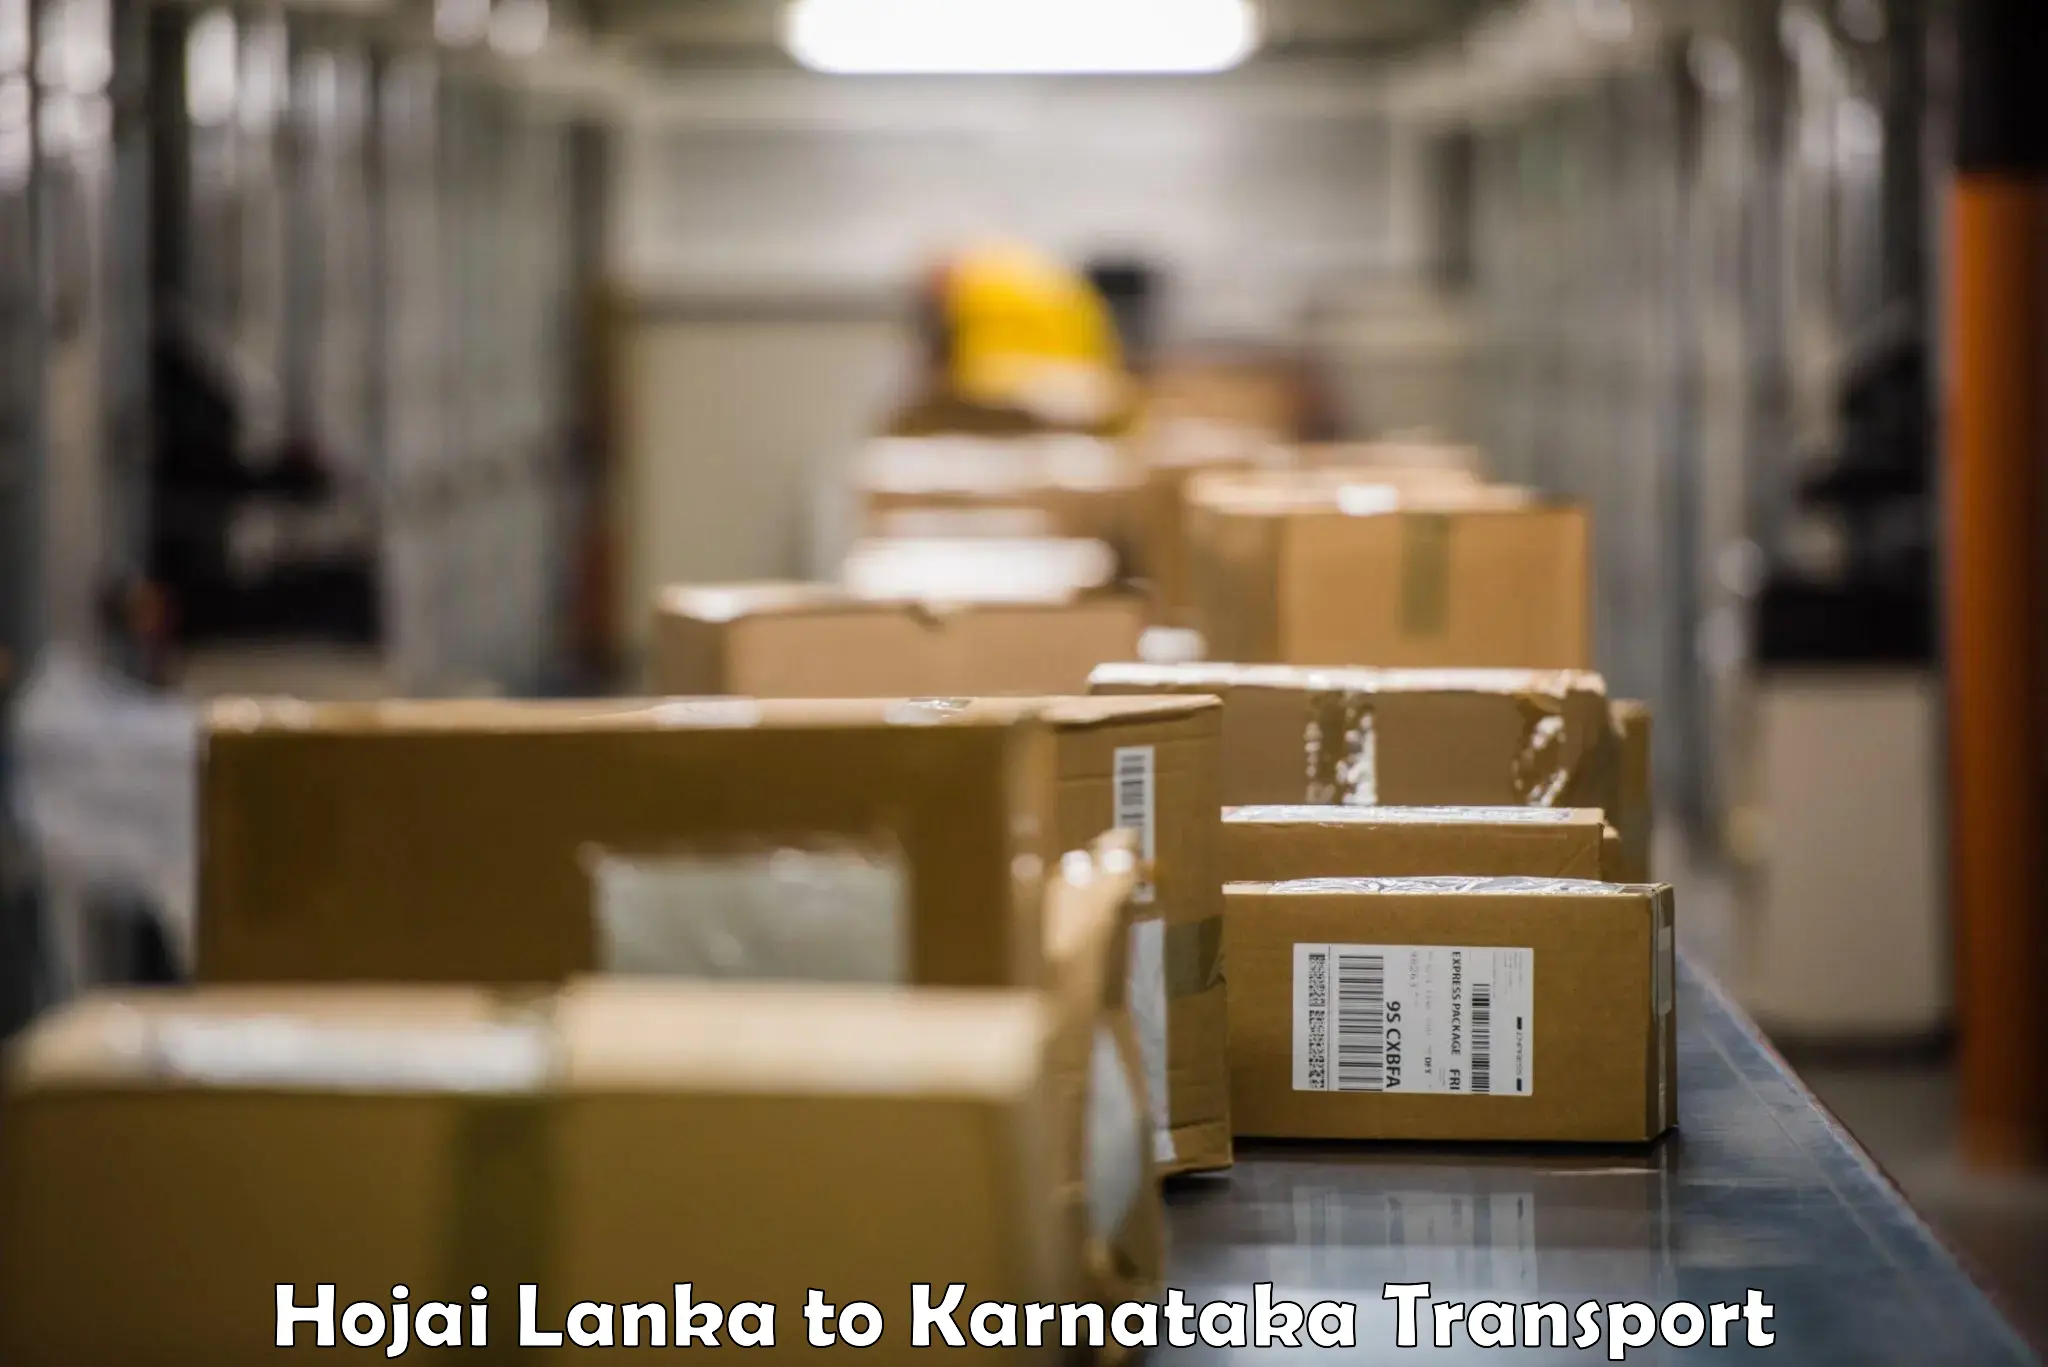 Goods delivery service Hojai Lanka to Bagalkot